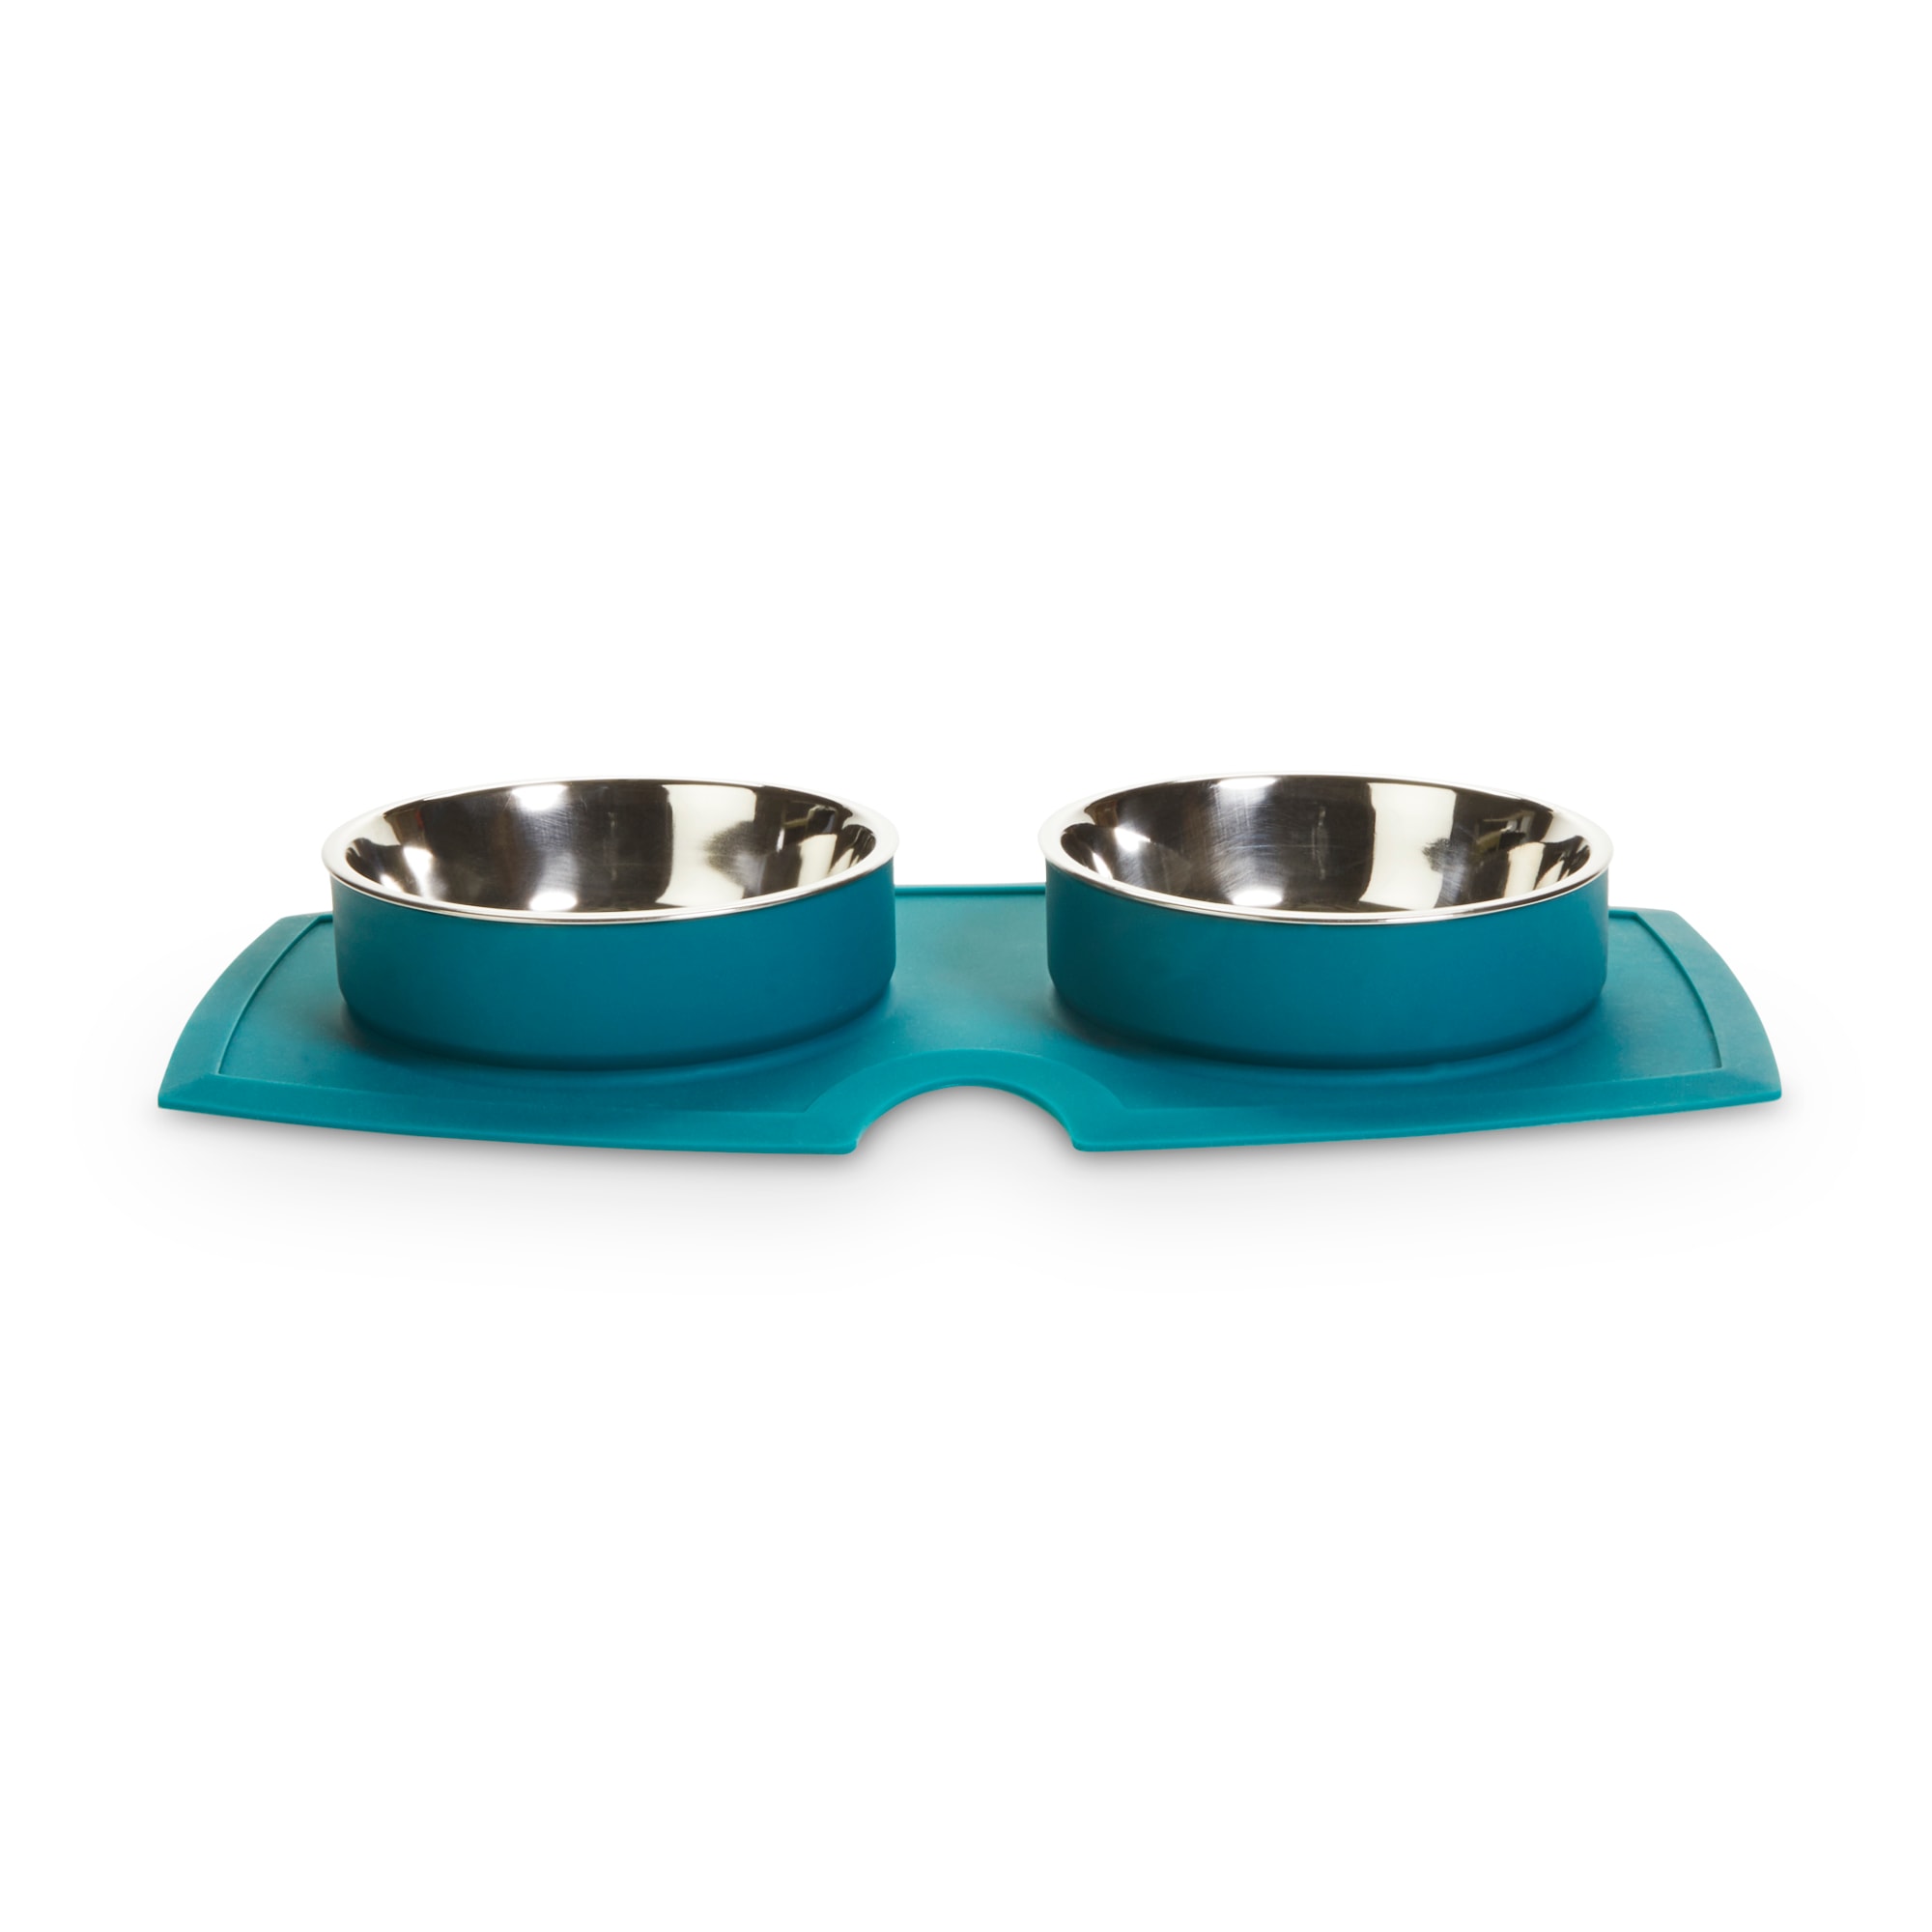 Together　Silicone　Diner　Better　Double　Bowls　EveryYay　Stainless-Steel　Cups　for　Teal　Dogs,　with　Petco